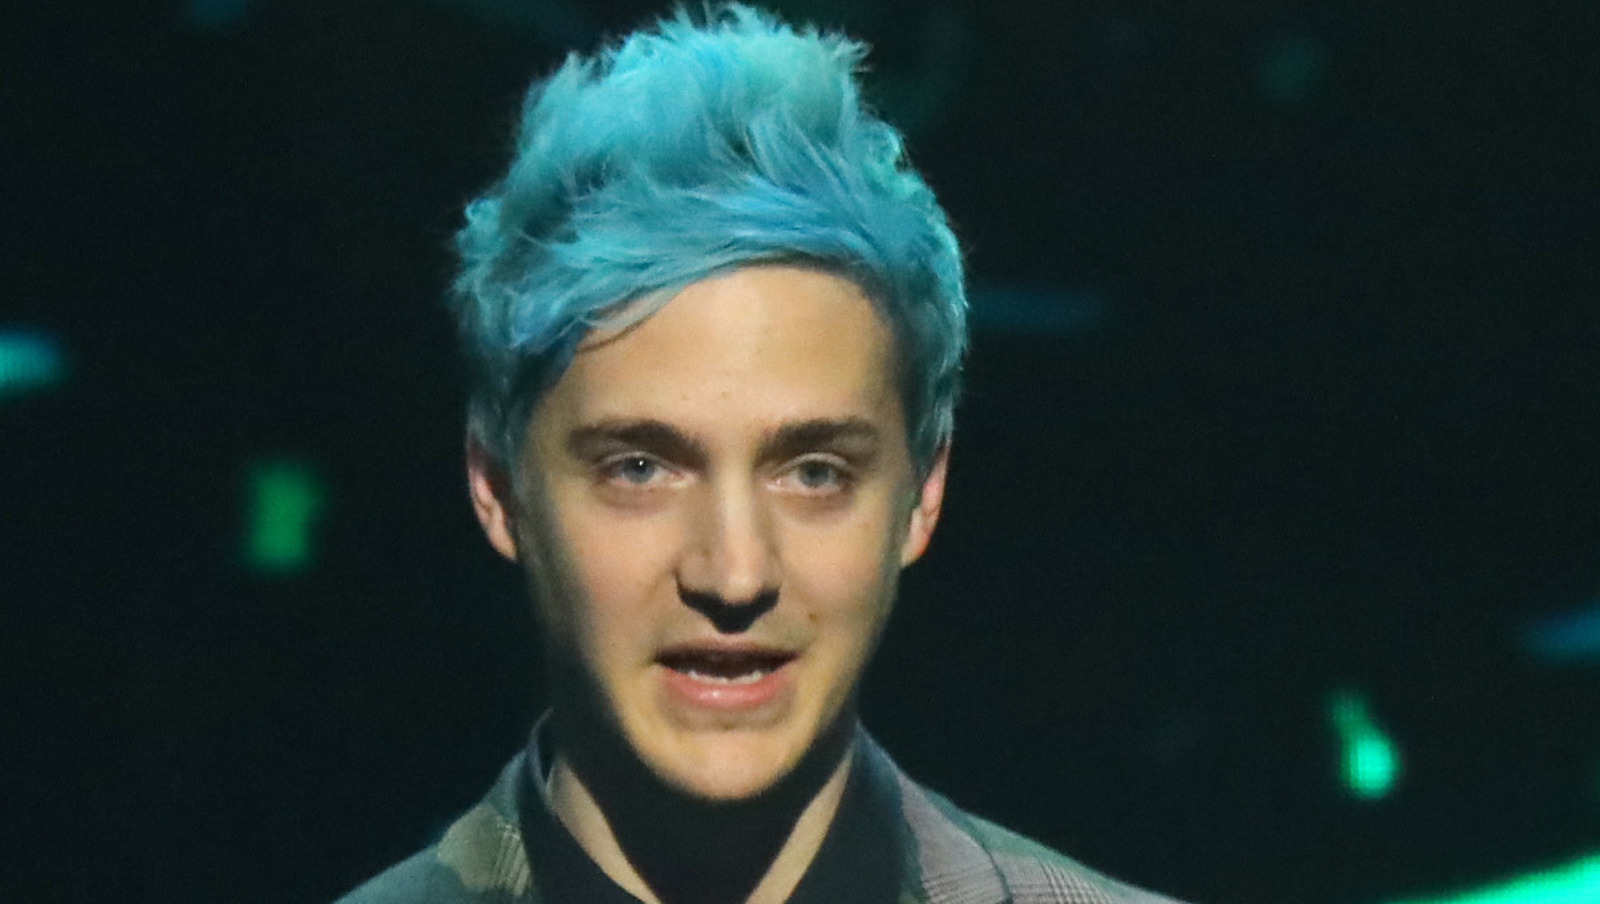 Ninja's Blue Hair on Twitch: The Story Behind the Iconic Look - wide 5